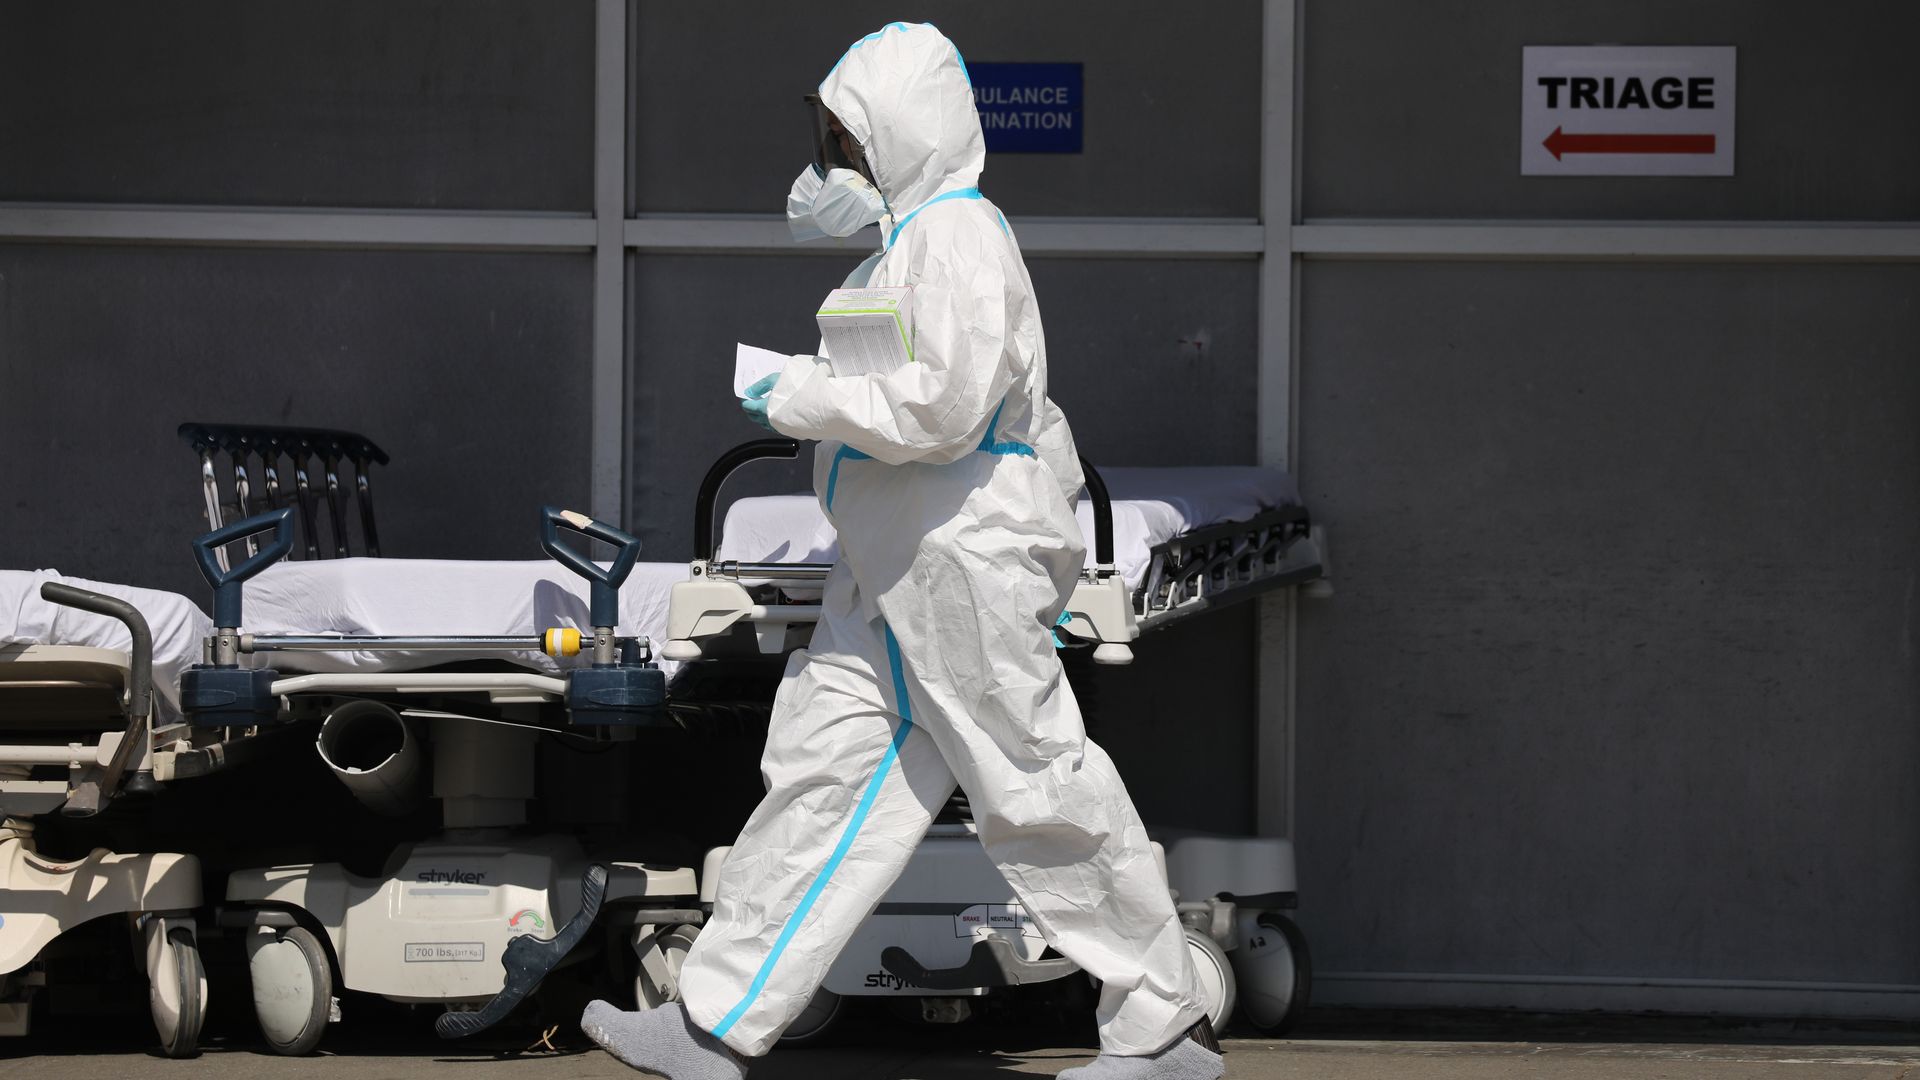 In this image, a person in personal protective gear walks